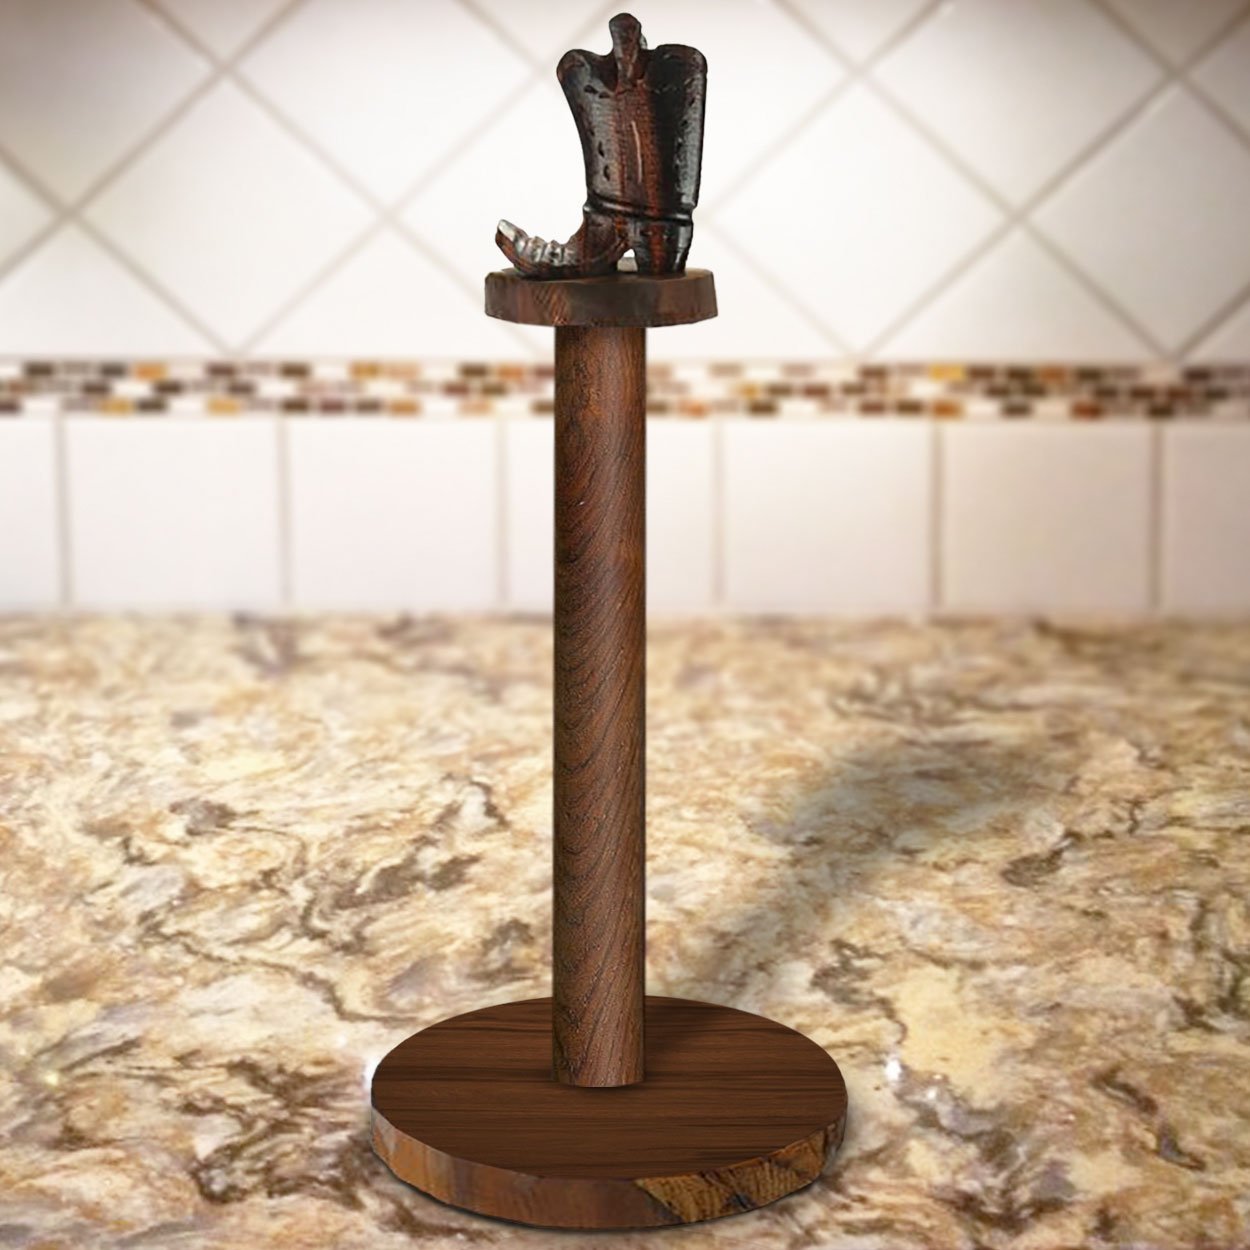 172056 - Boot Carved Ironwood Paper Towel Holder